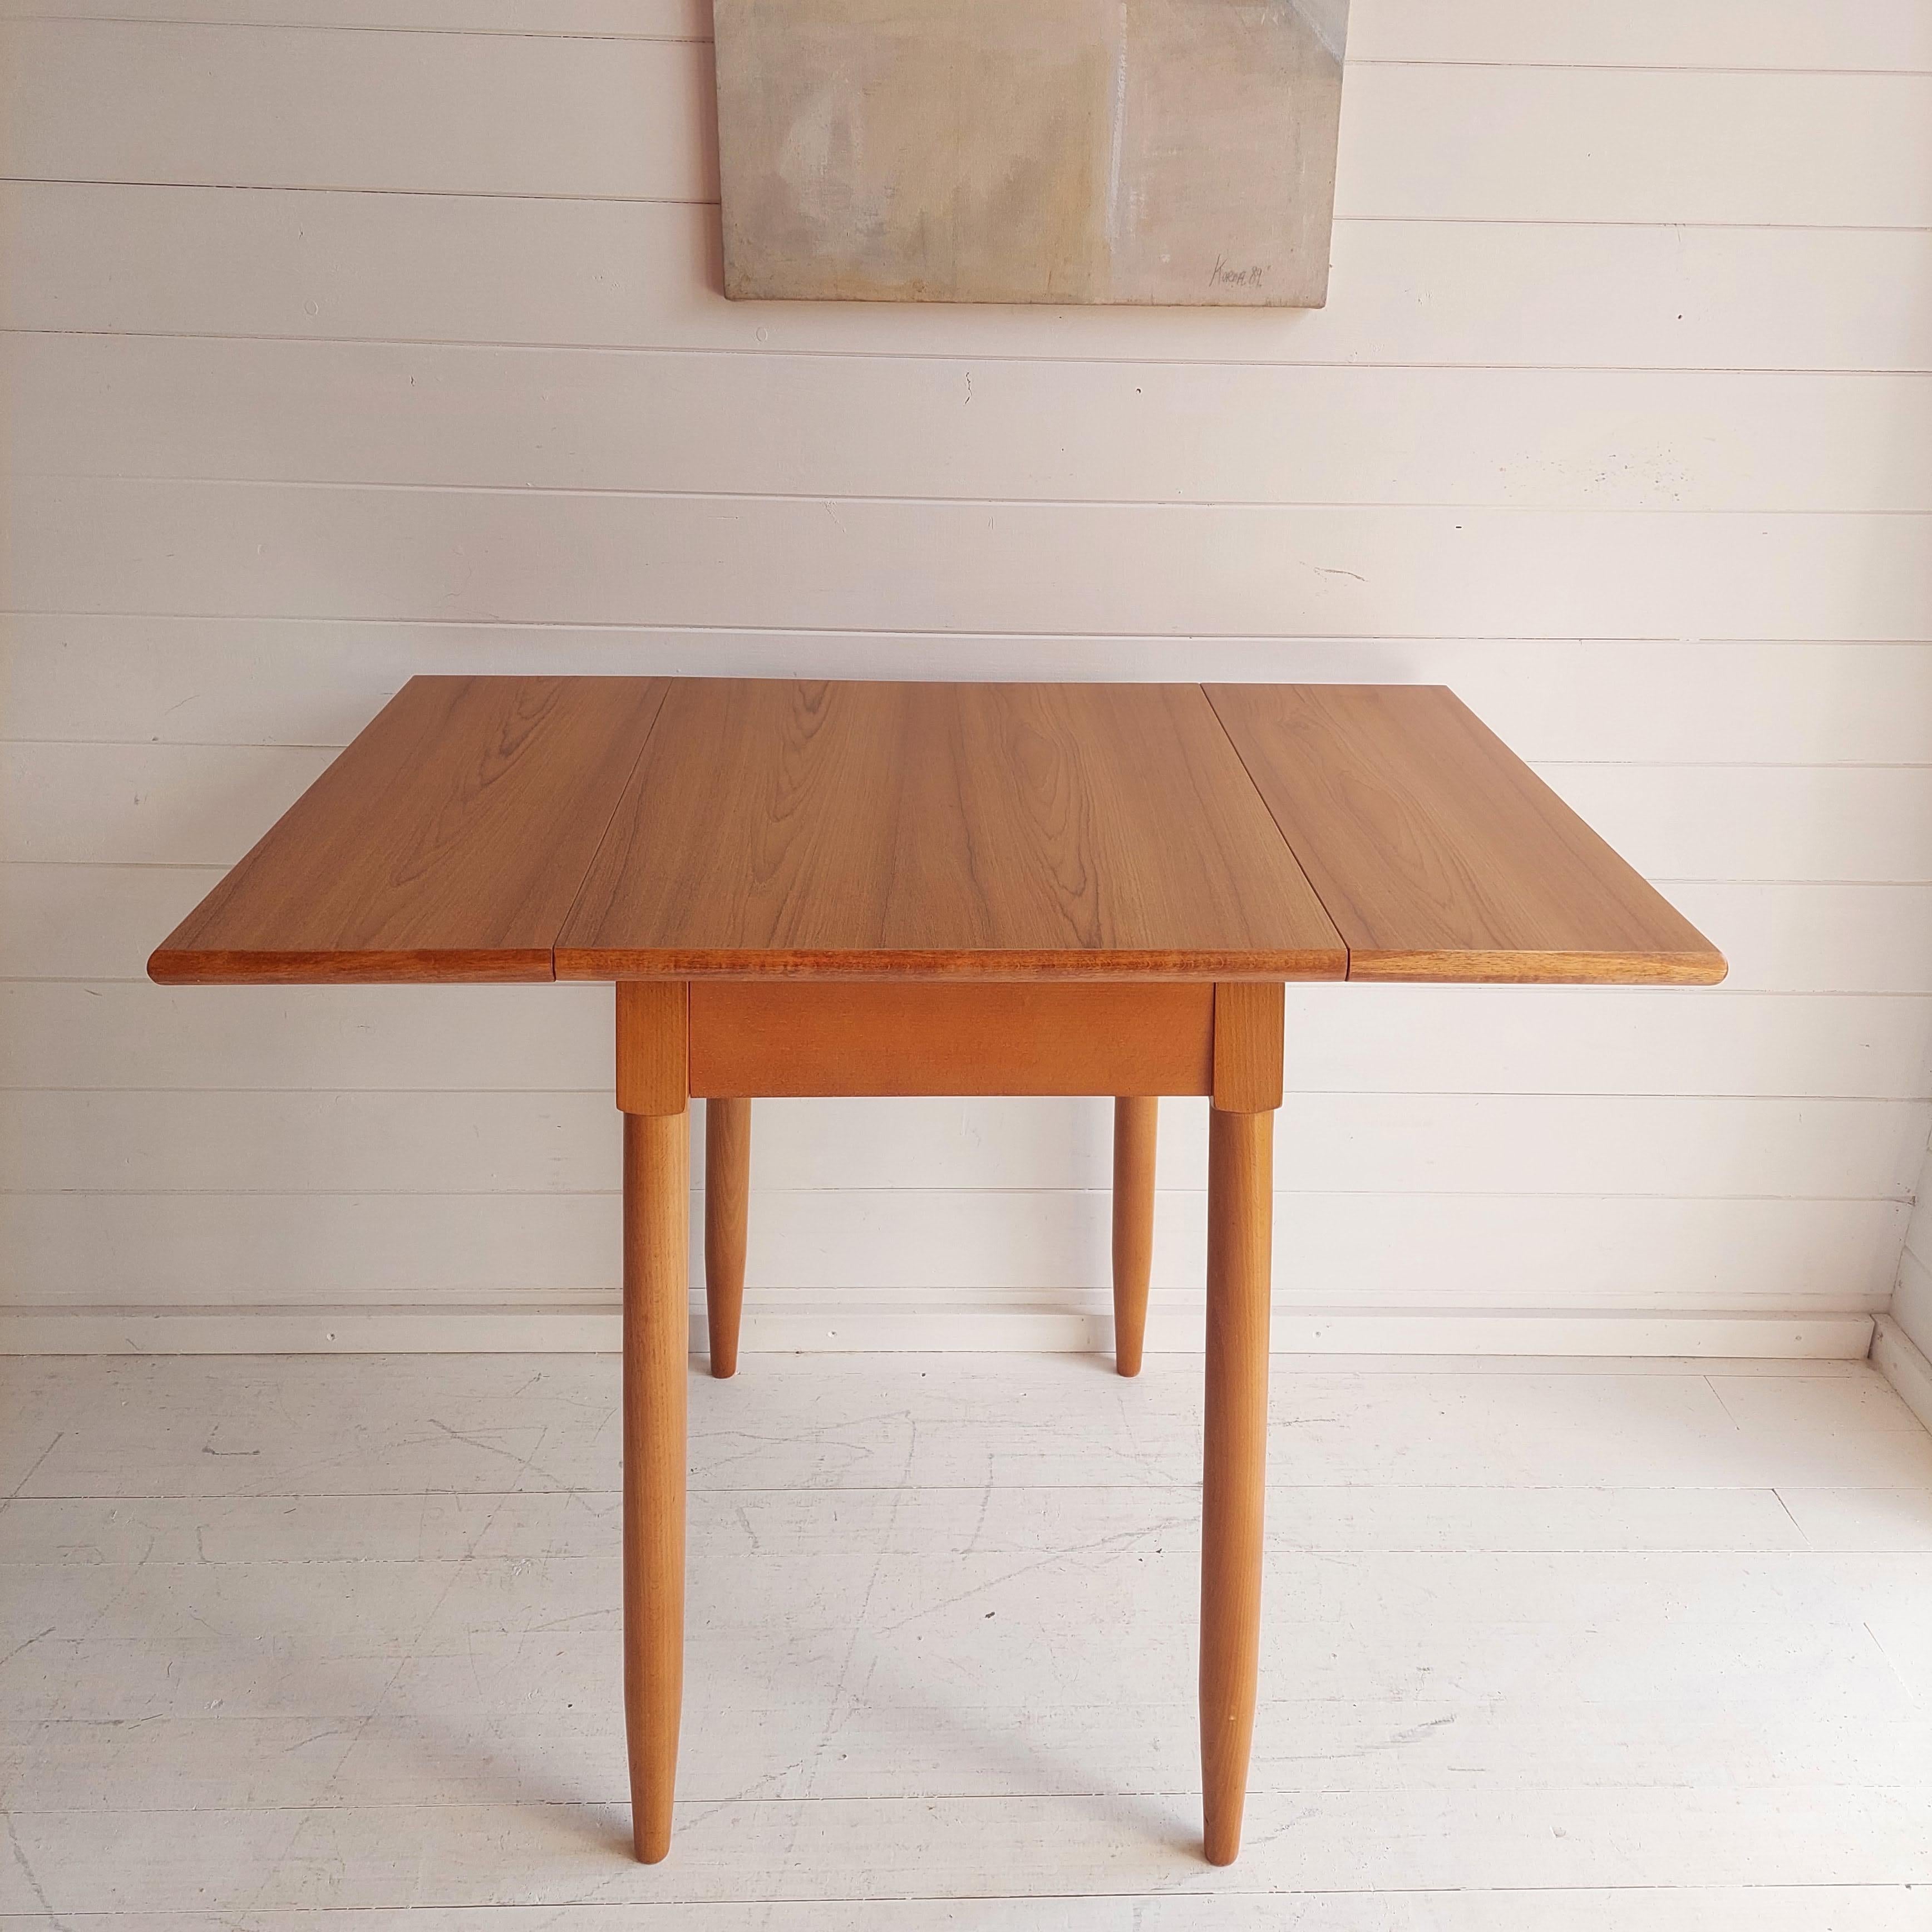 20th Century Late Mid-Century Wood Effect Laminate Drop Leaf Kitchen Dining Table